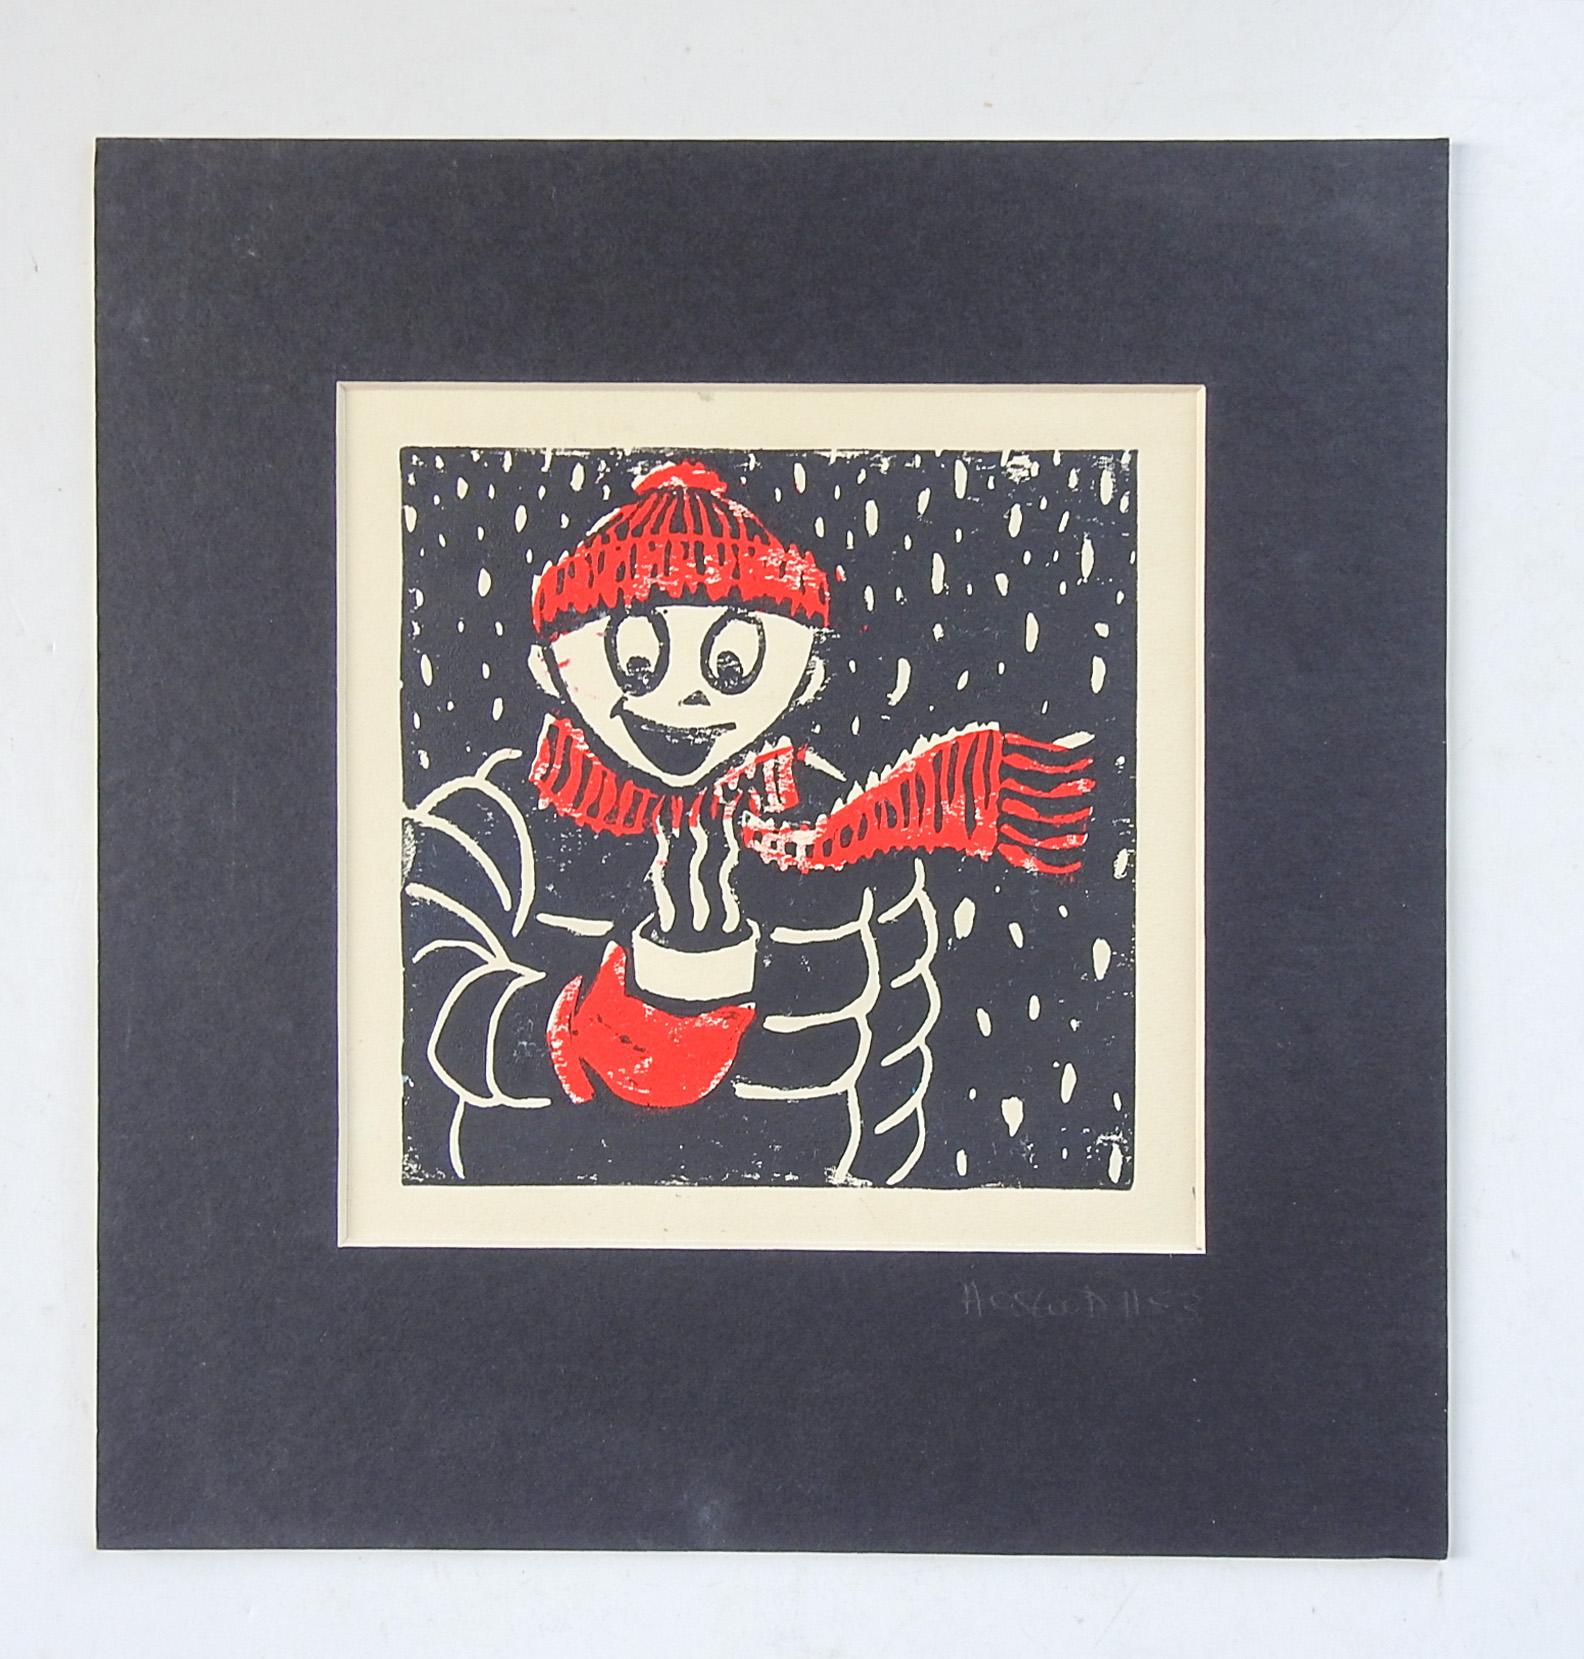 Serigraph on paper of character bundled up for winter holding a steaming cup of coffee or hot chocolate. In red and black, signed A Osgood numbered 1/53 at bottom of mat. Unframed, displayed in mat and backing, opening size 7